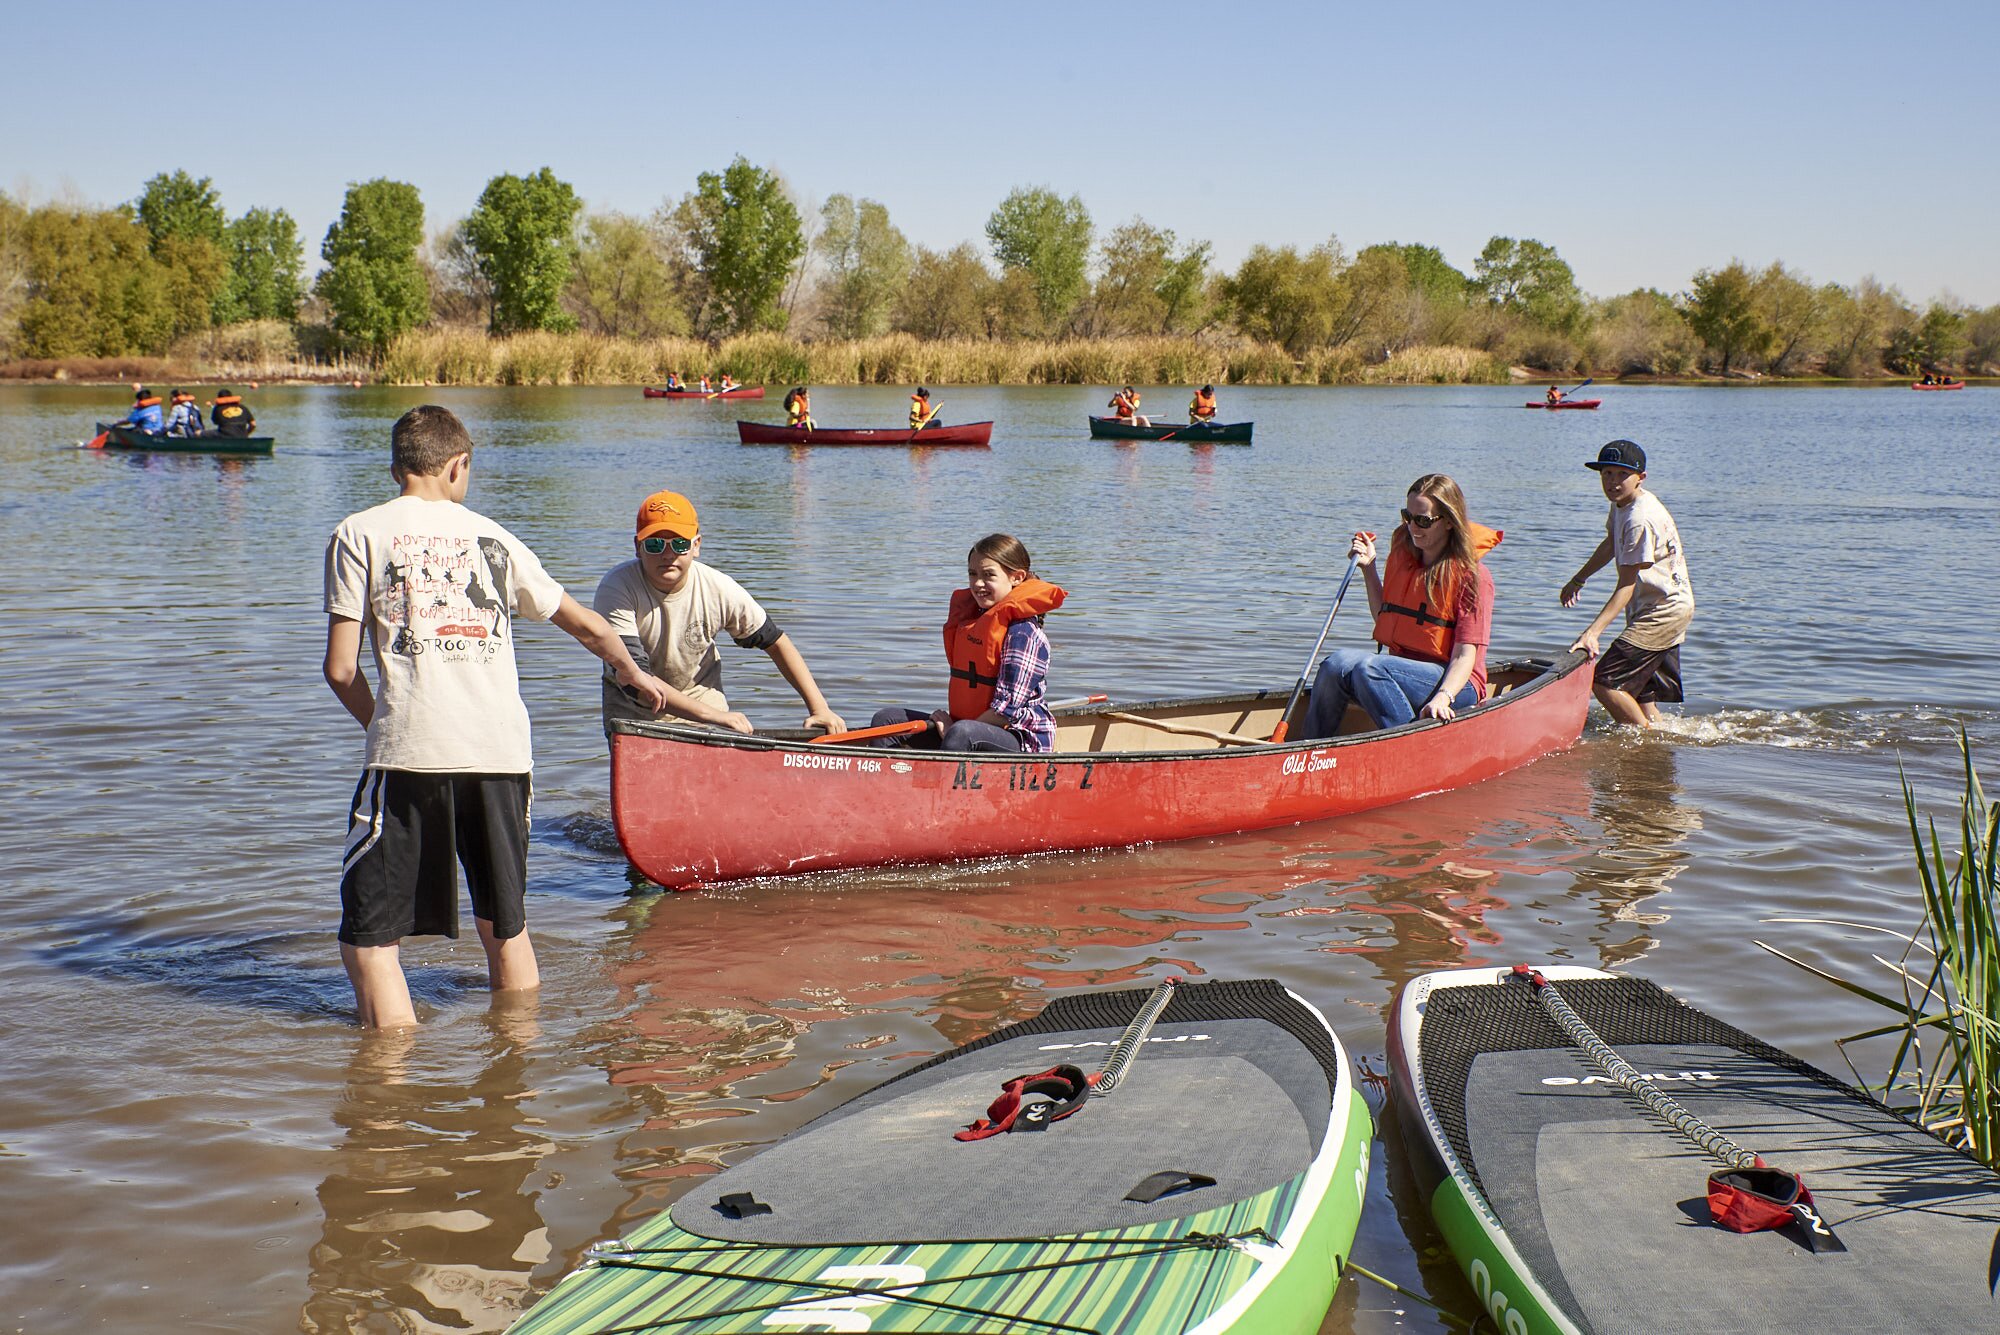 FREE Canoeing, Paddle Boarding & More!